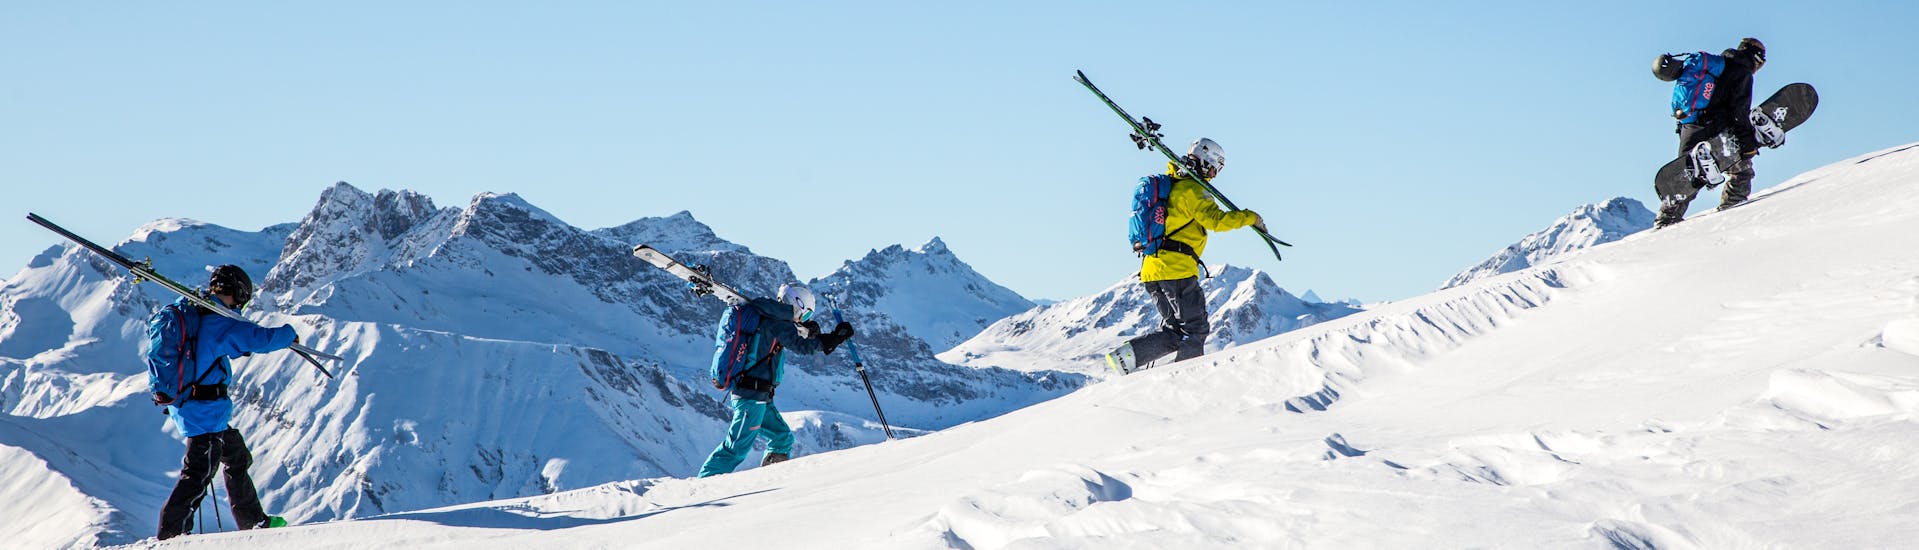 Off-Piste Skiing Lessons for Advanced Freeriders.